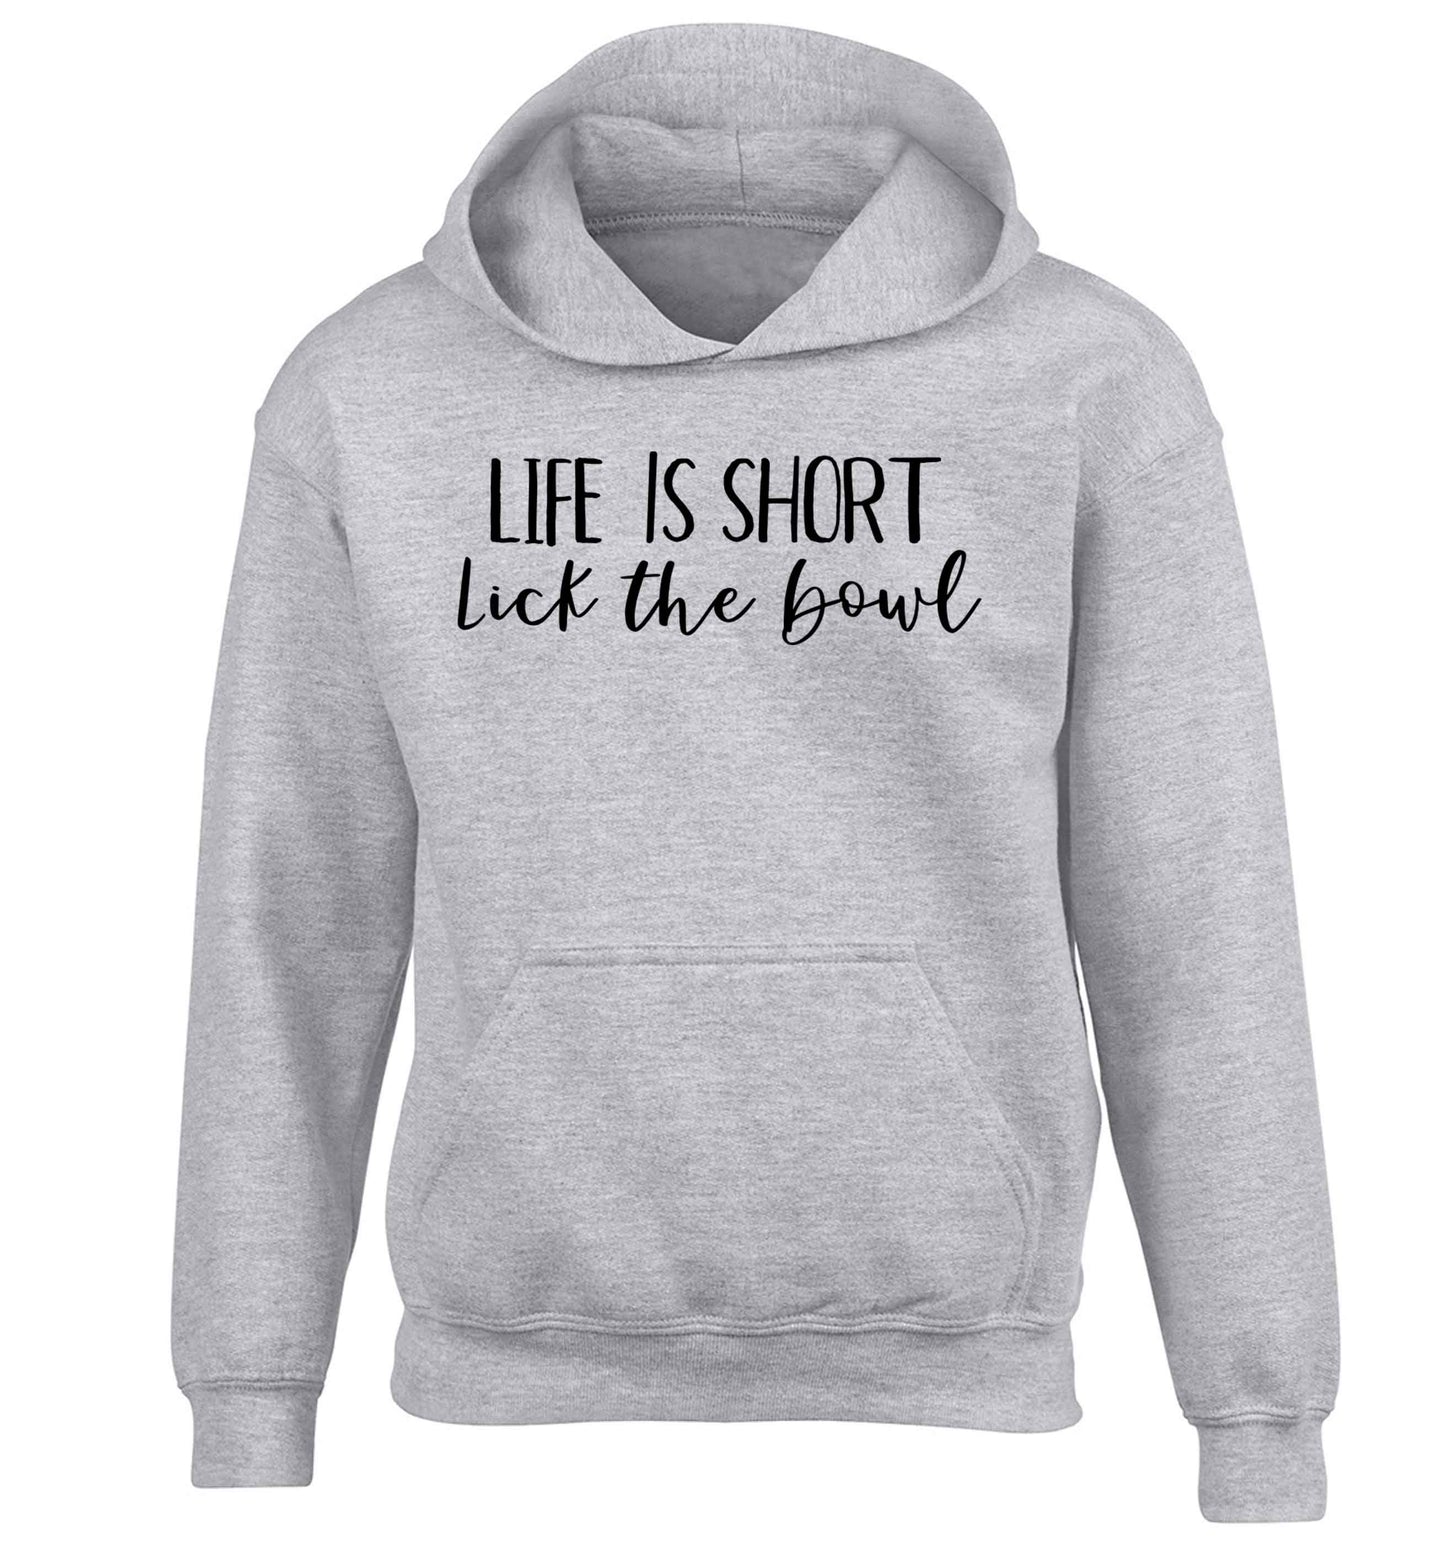 Life is short lick the bowl children's grey hoodie 12-13 Years